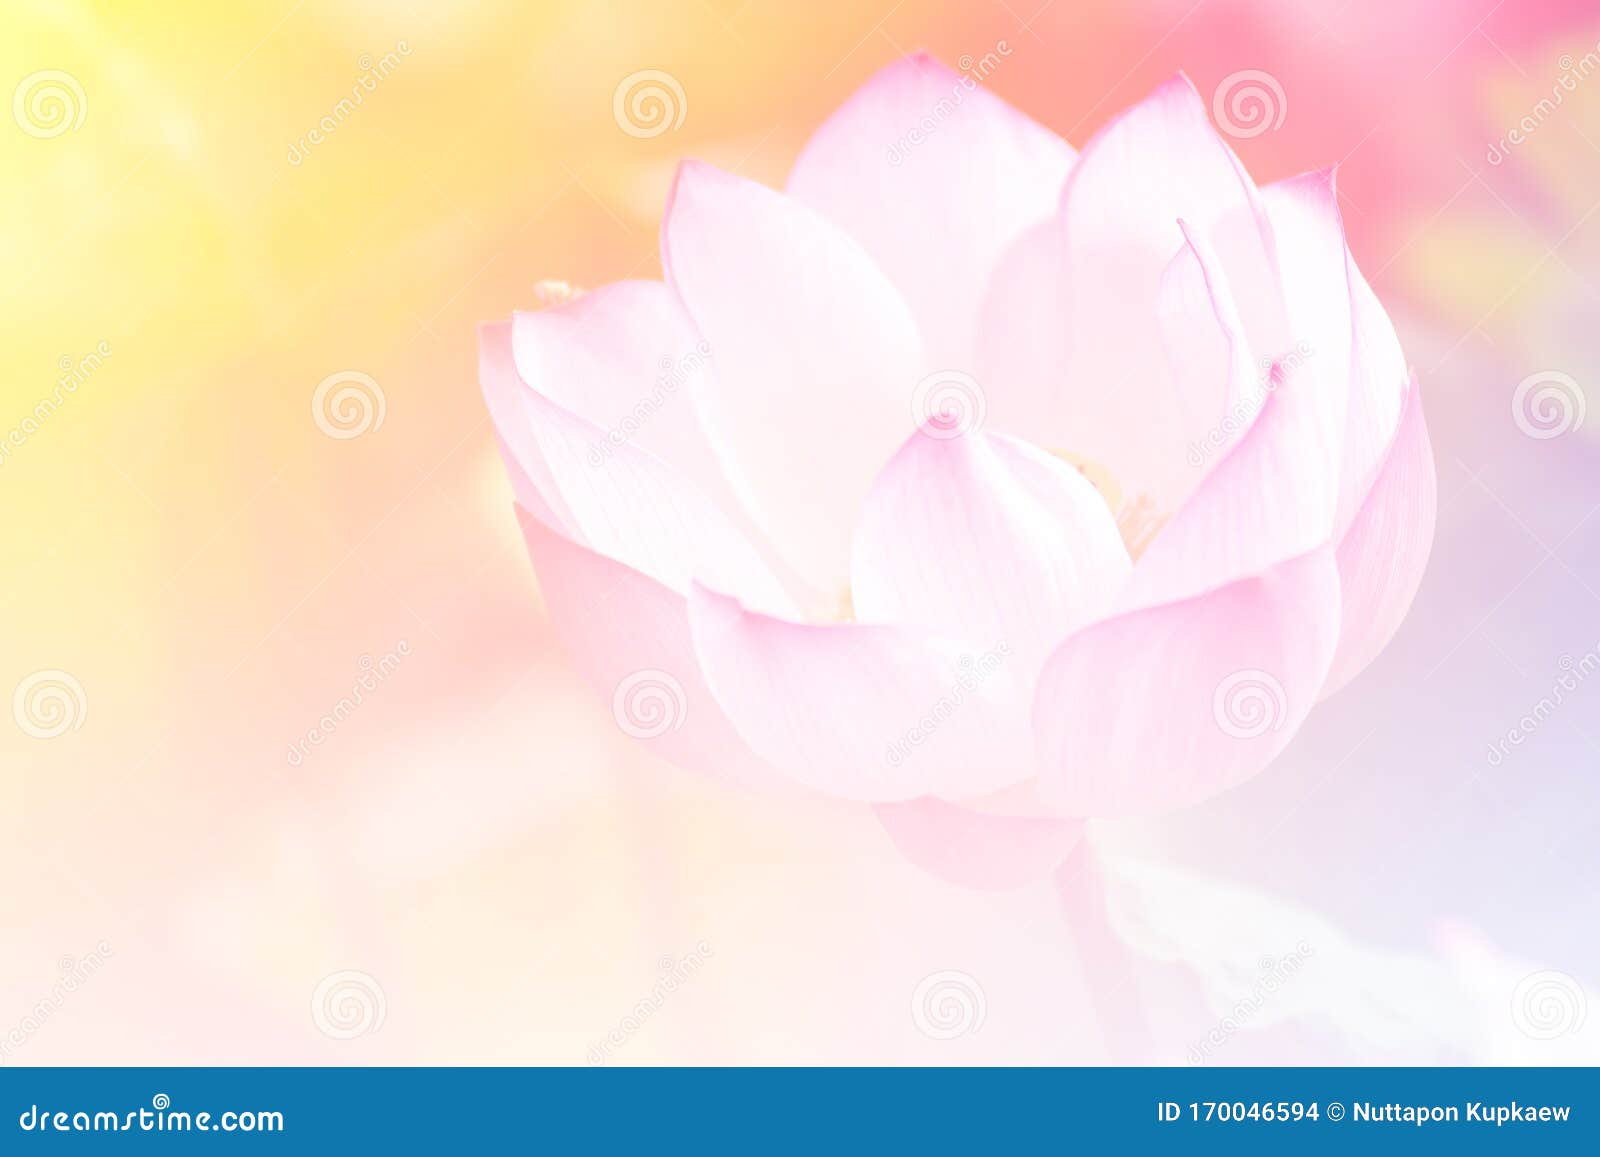 prepopulated pink lotus background image select focus